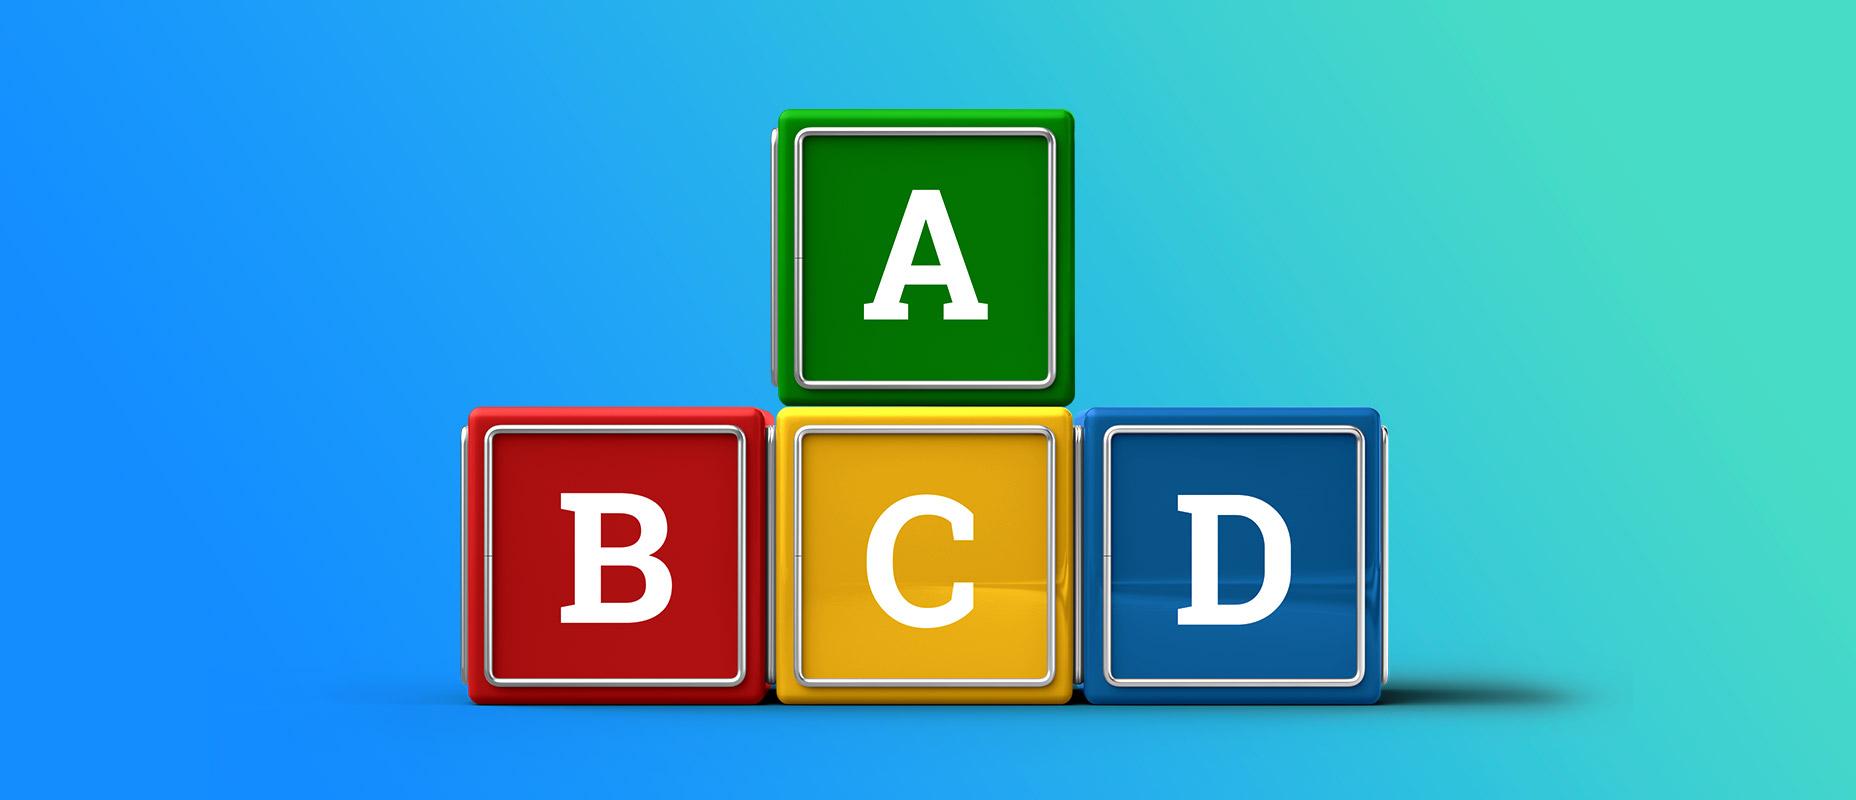 How to trade the ABCD pattern